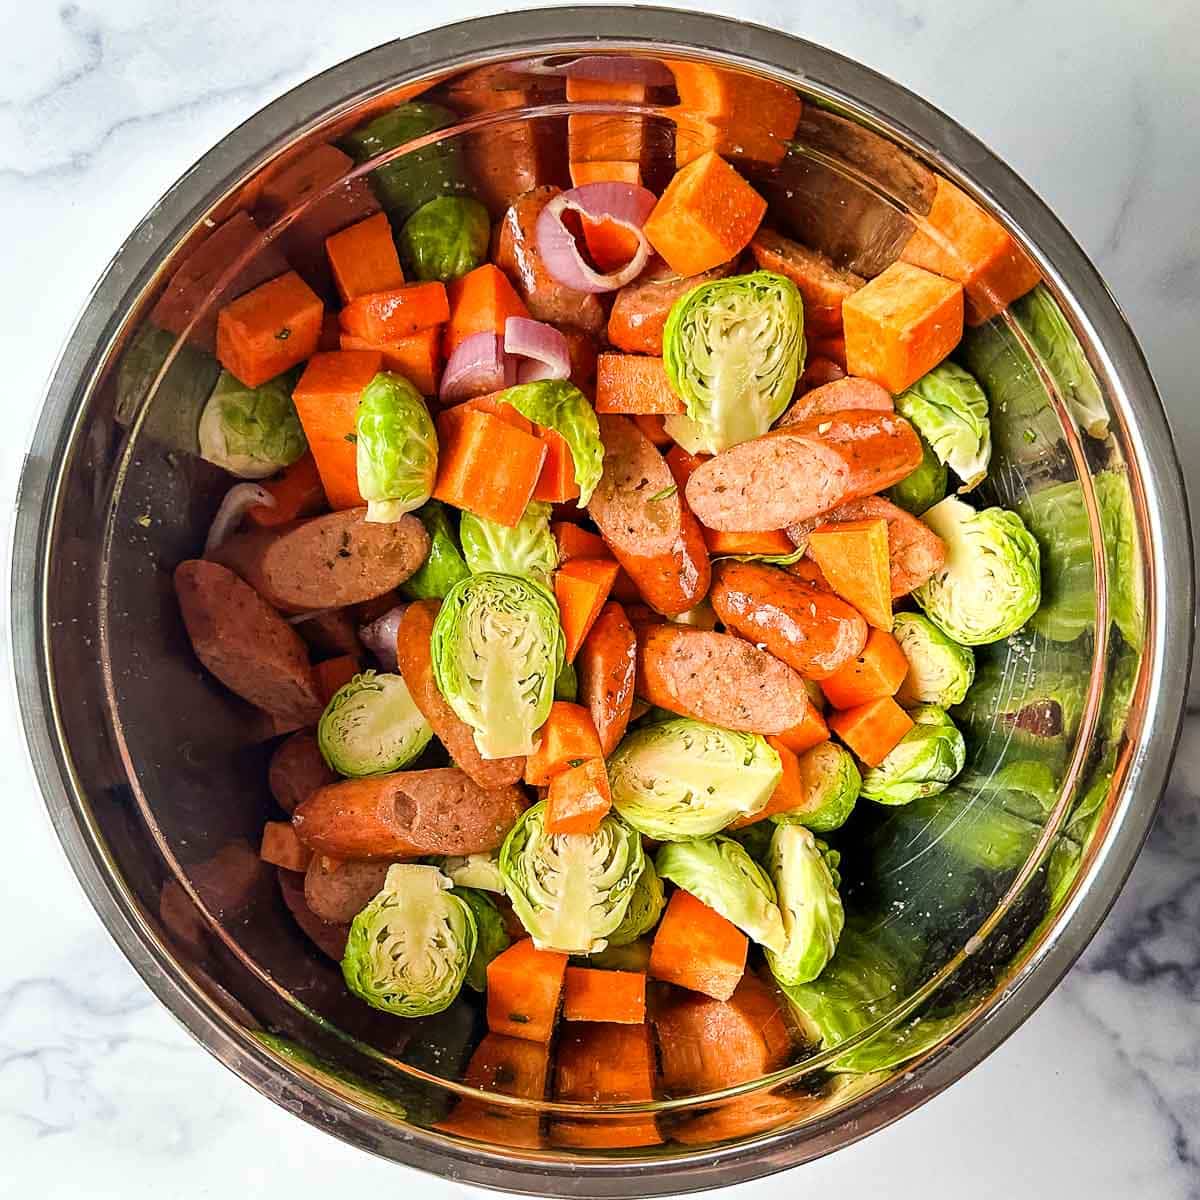 Brussels sprouts, sweet potato, shallots, rosemary, and sausage in a bowl.